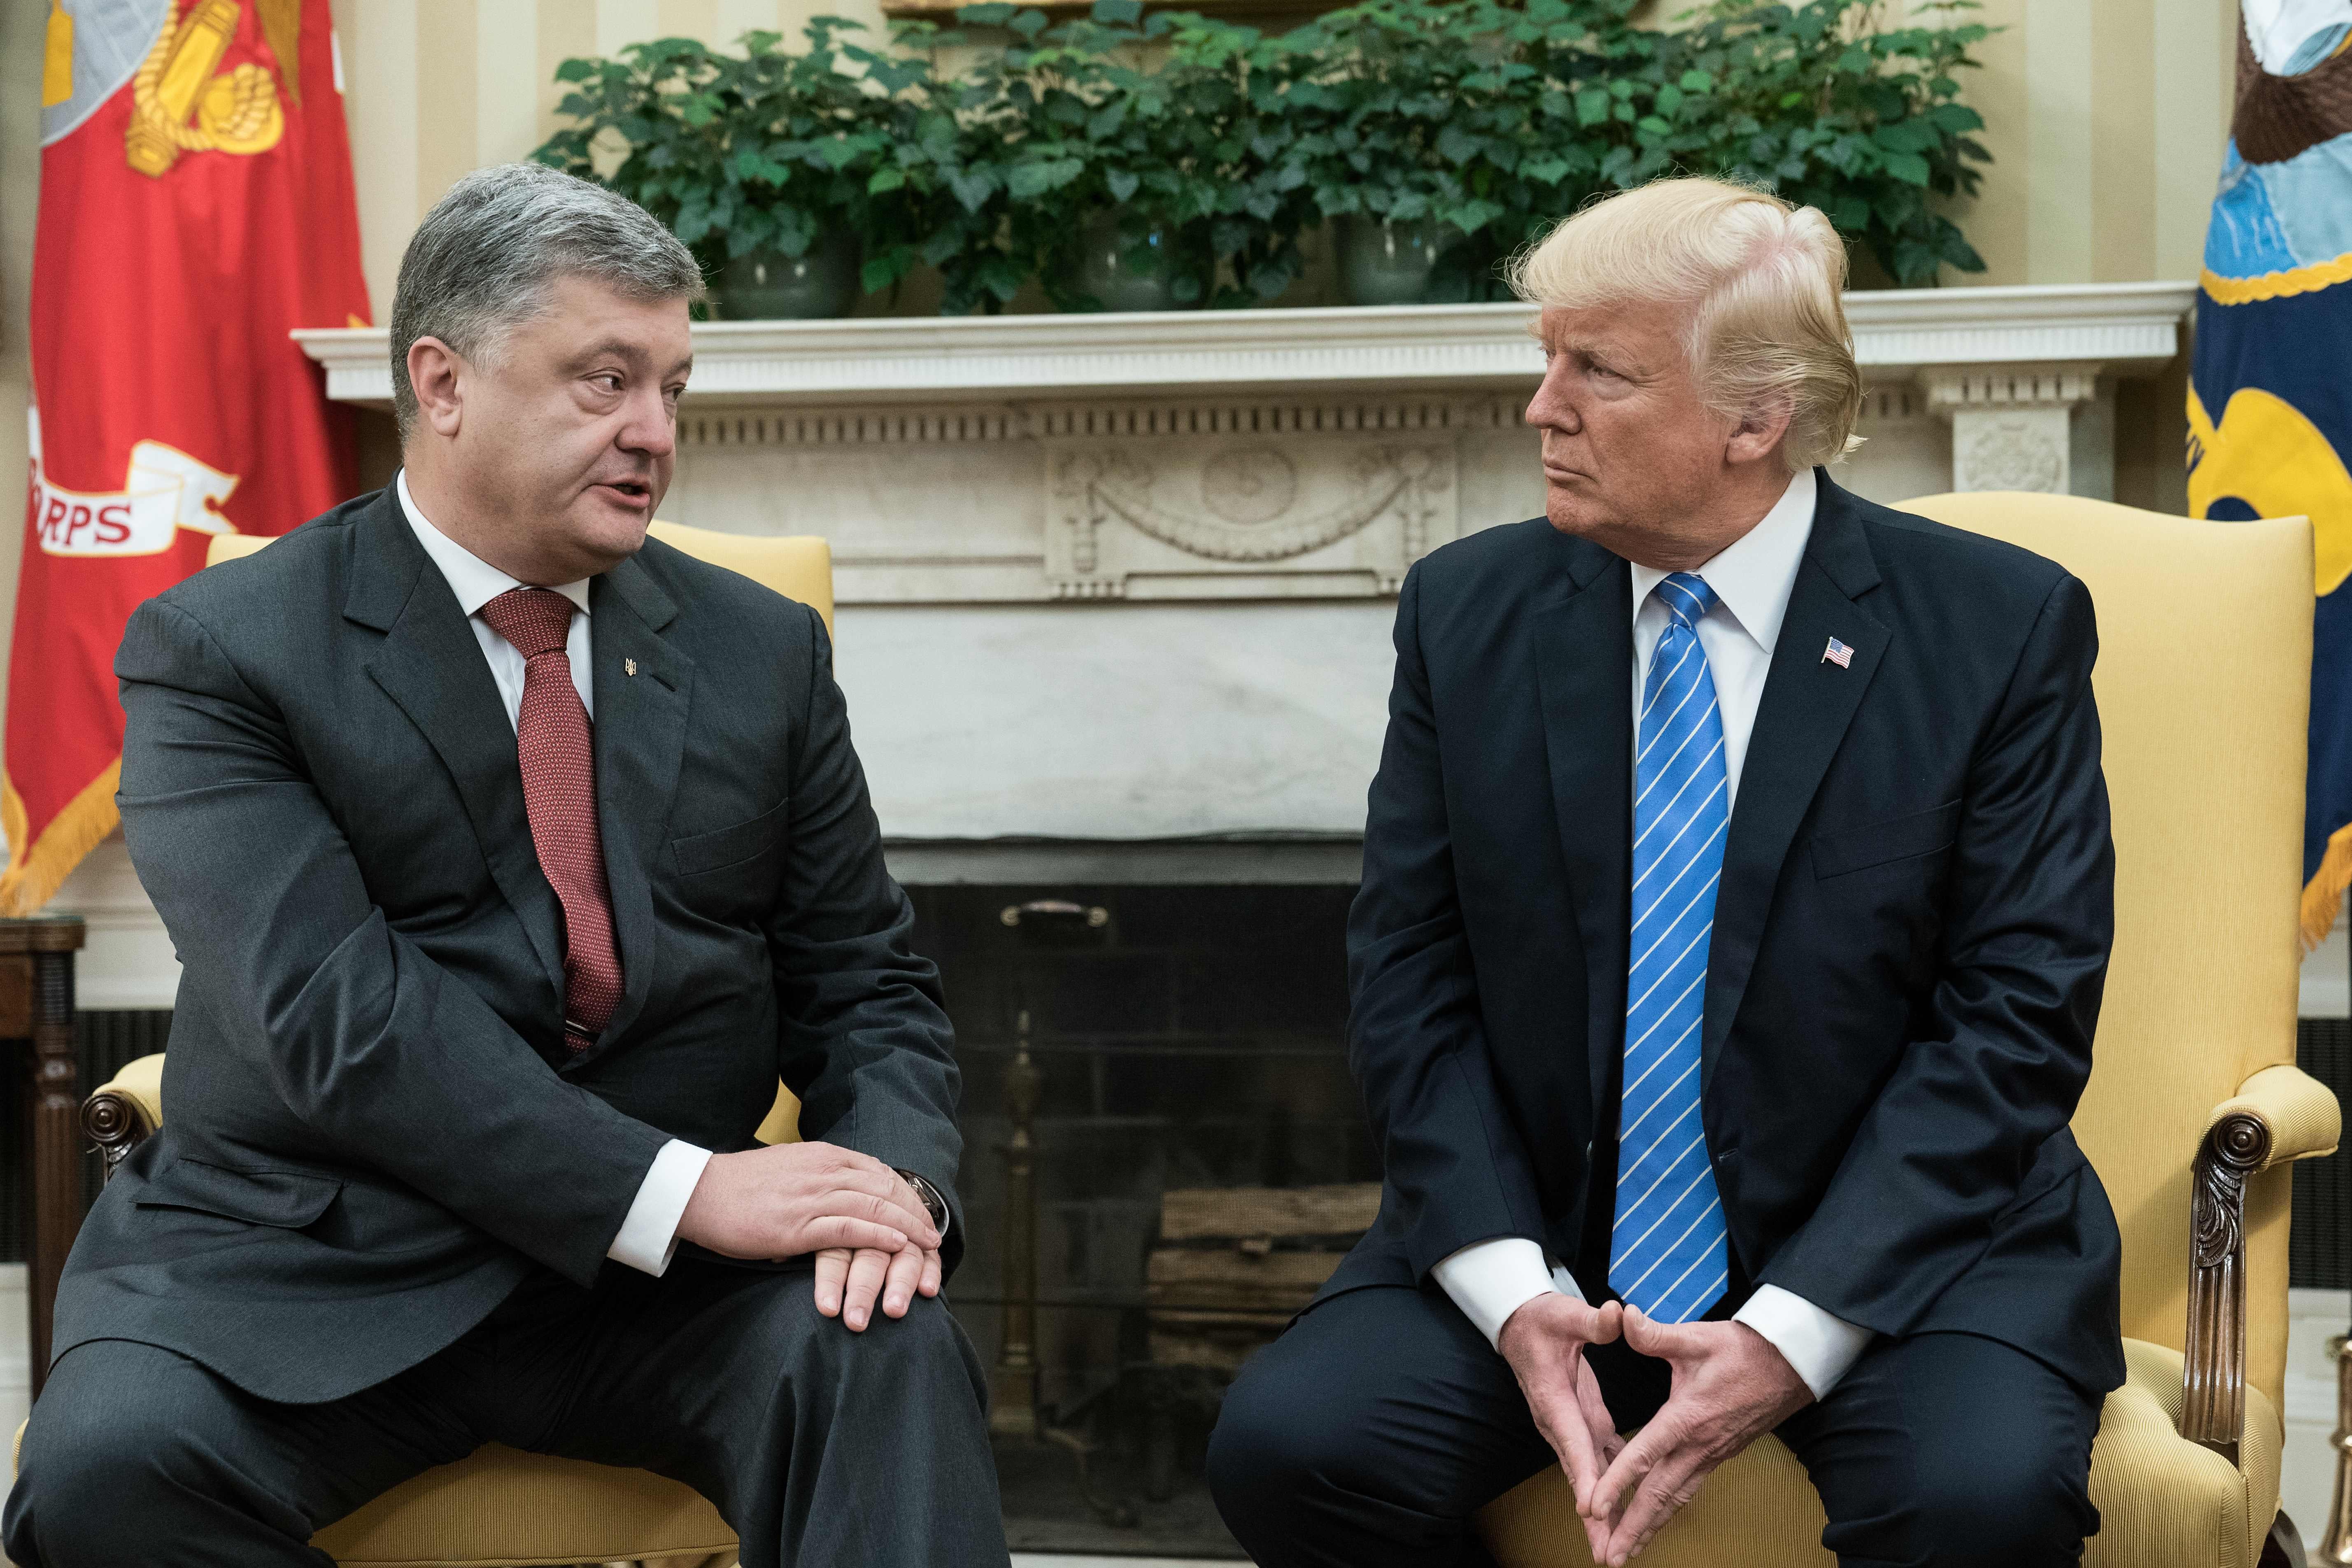 US President Donald Trump meets with his Ukrainian counterpart Petro Poroshenko in the Oval Office at the White House in Washington, DC, on June 20, 2017. / AFP PHOTO / NICHOLAS KAMM        (Photo credit should read NICHOLAS KAMM/AFP/Getty Images)